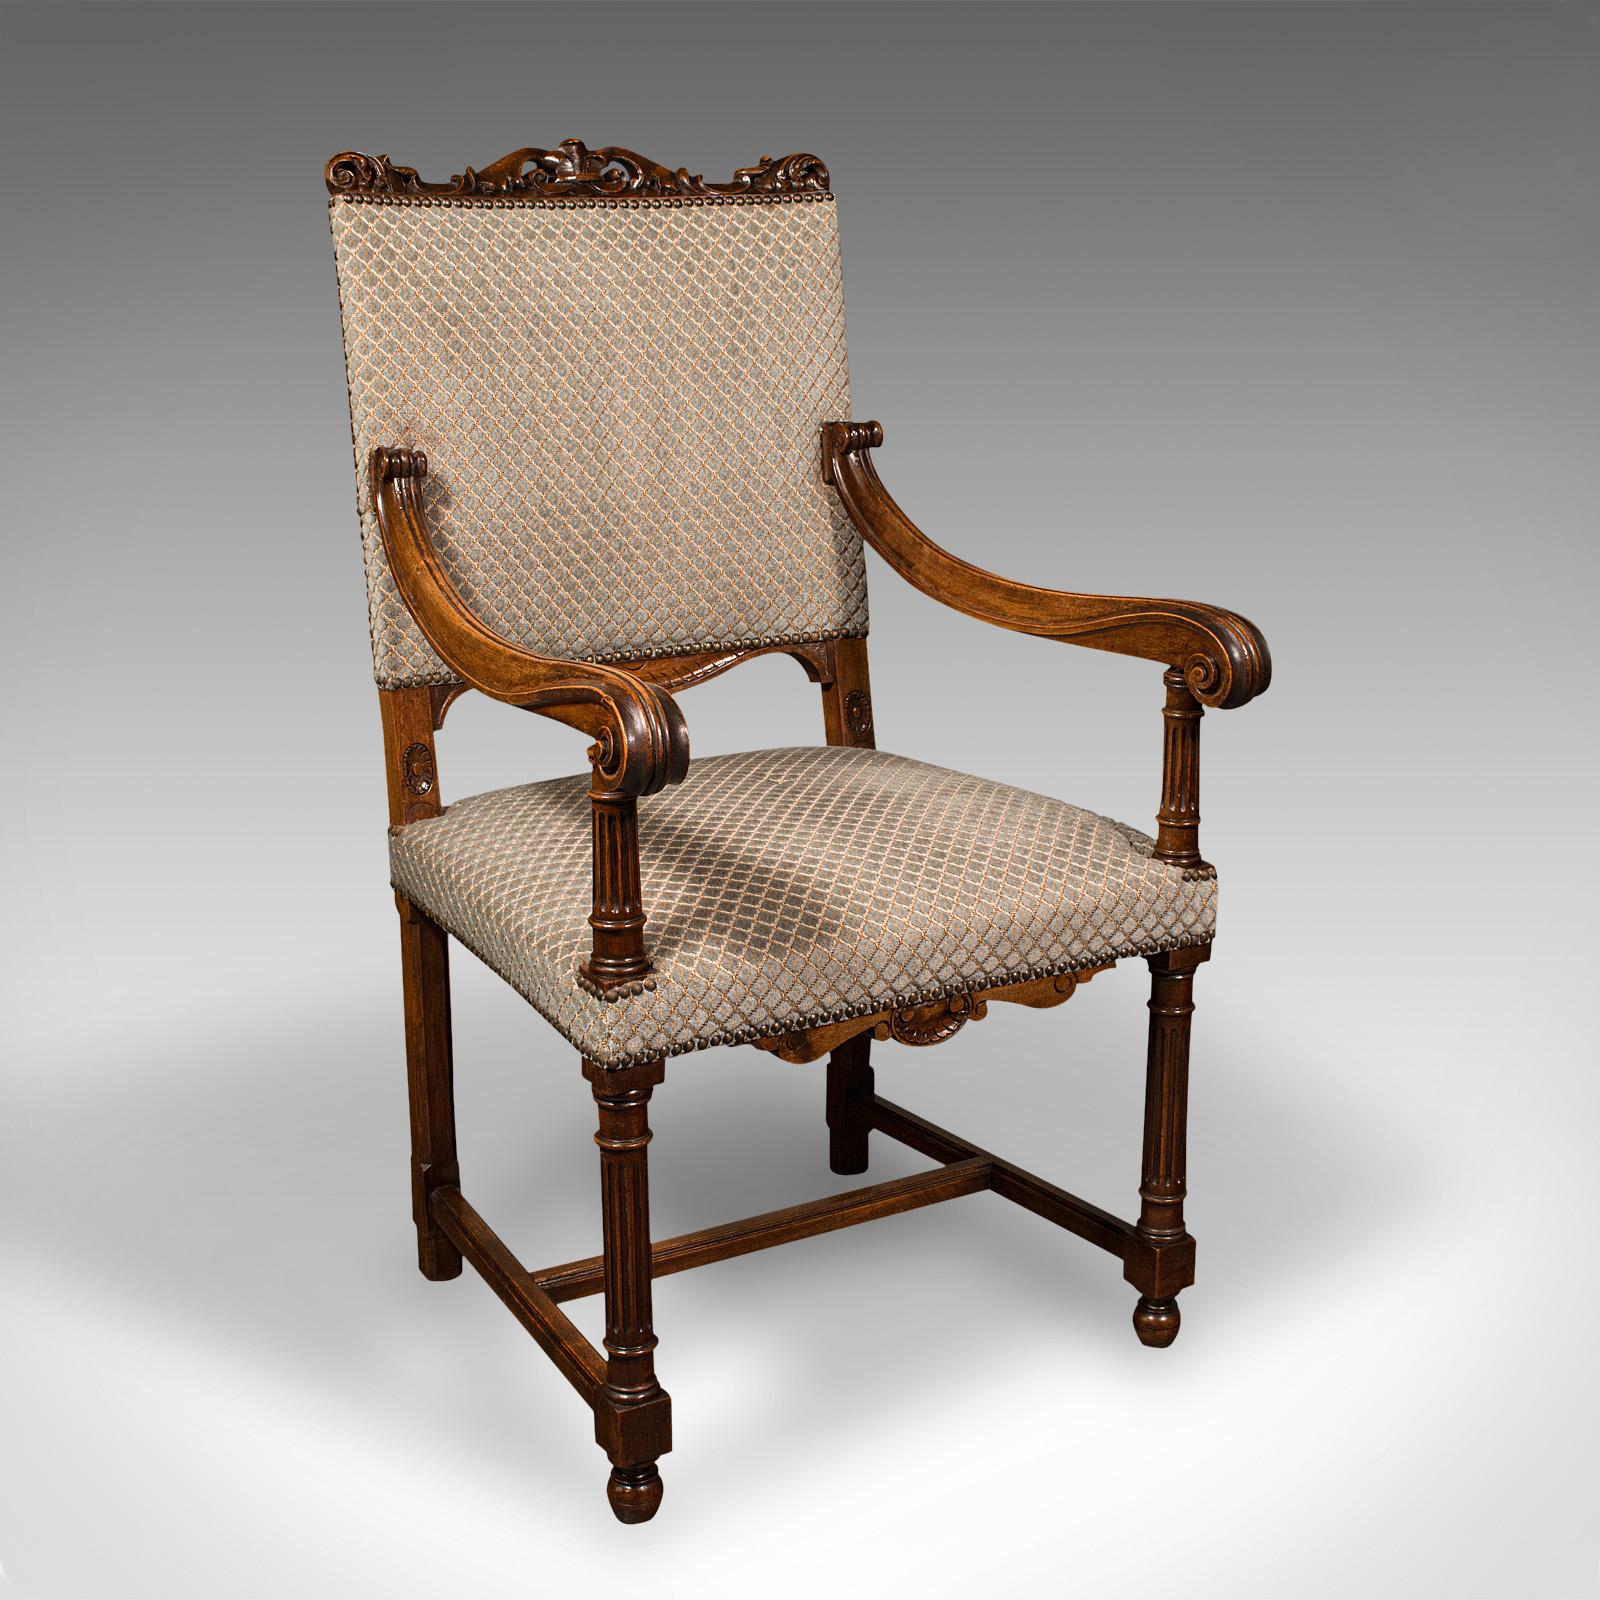 This is a set of 8 antique dining chairs. An English, walnut carver and seat with upholstered cushions, dating to the Edwardian period, circa 1910.

Graced with delightful walnut stocks and of appealing form
Displaying a desirable aged patina and